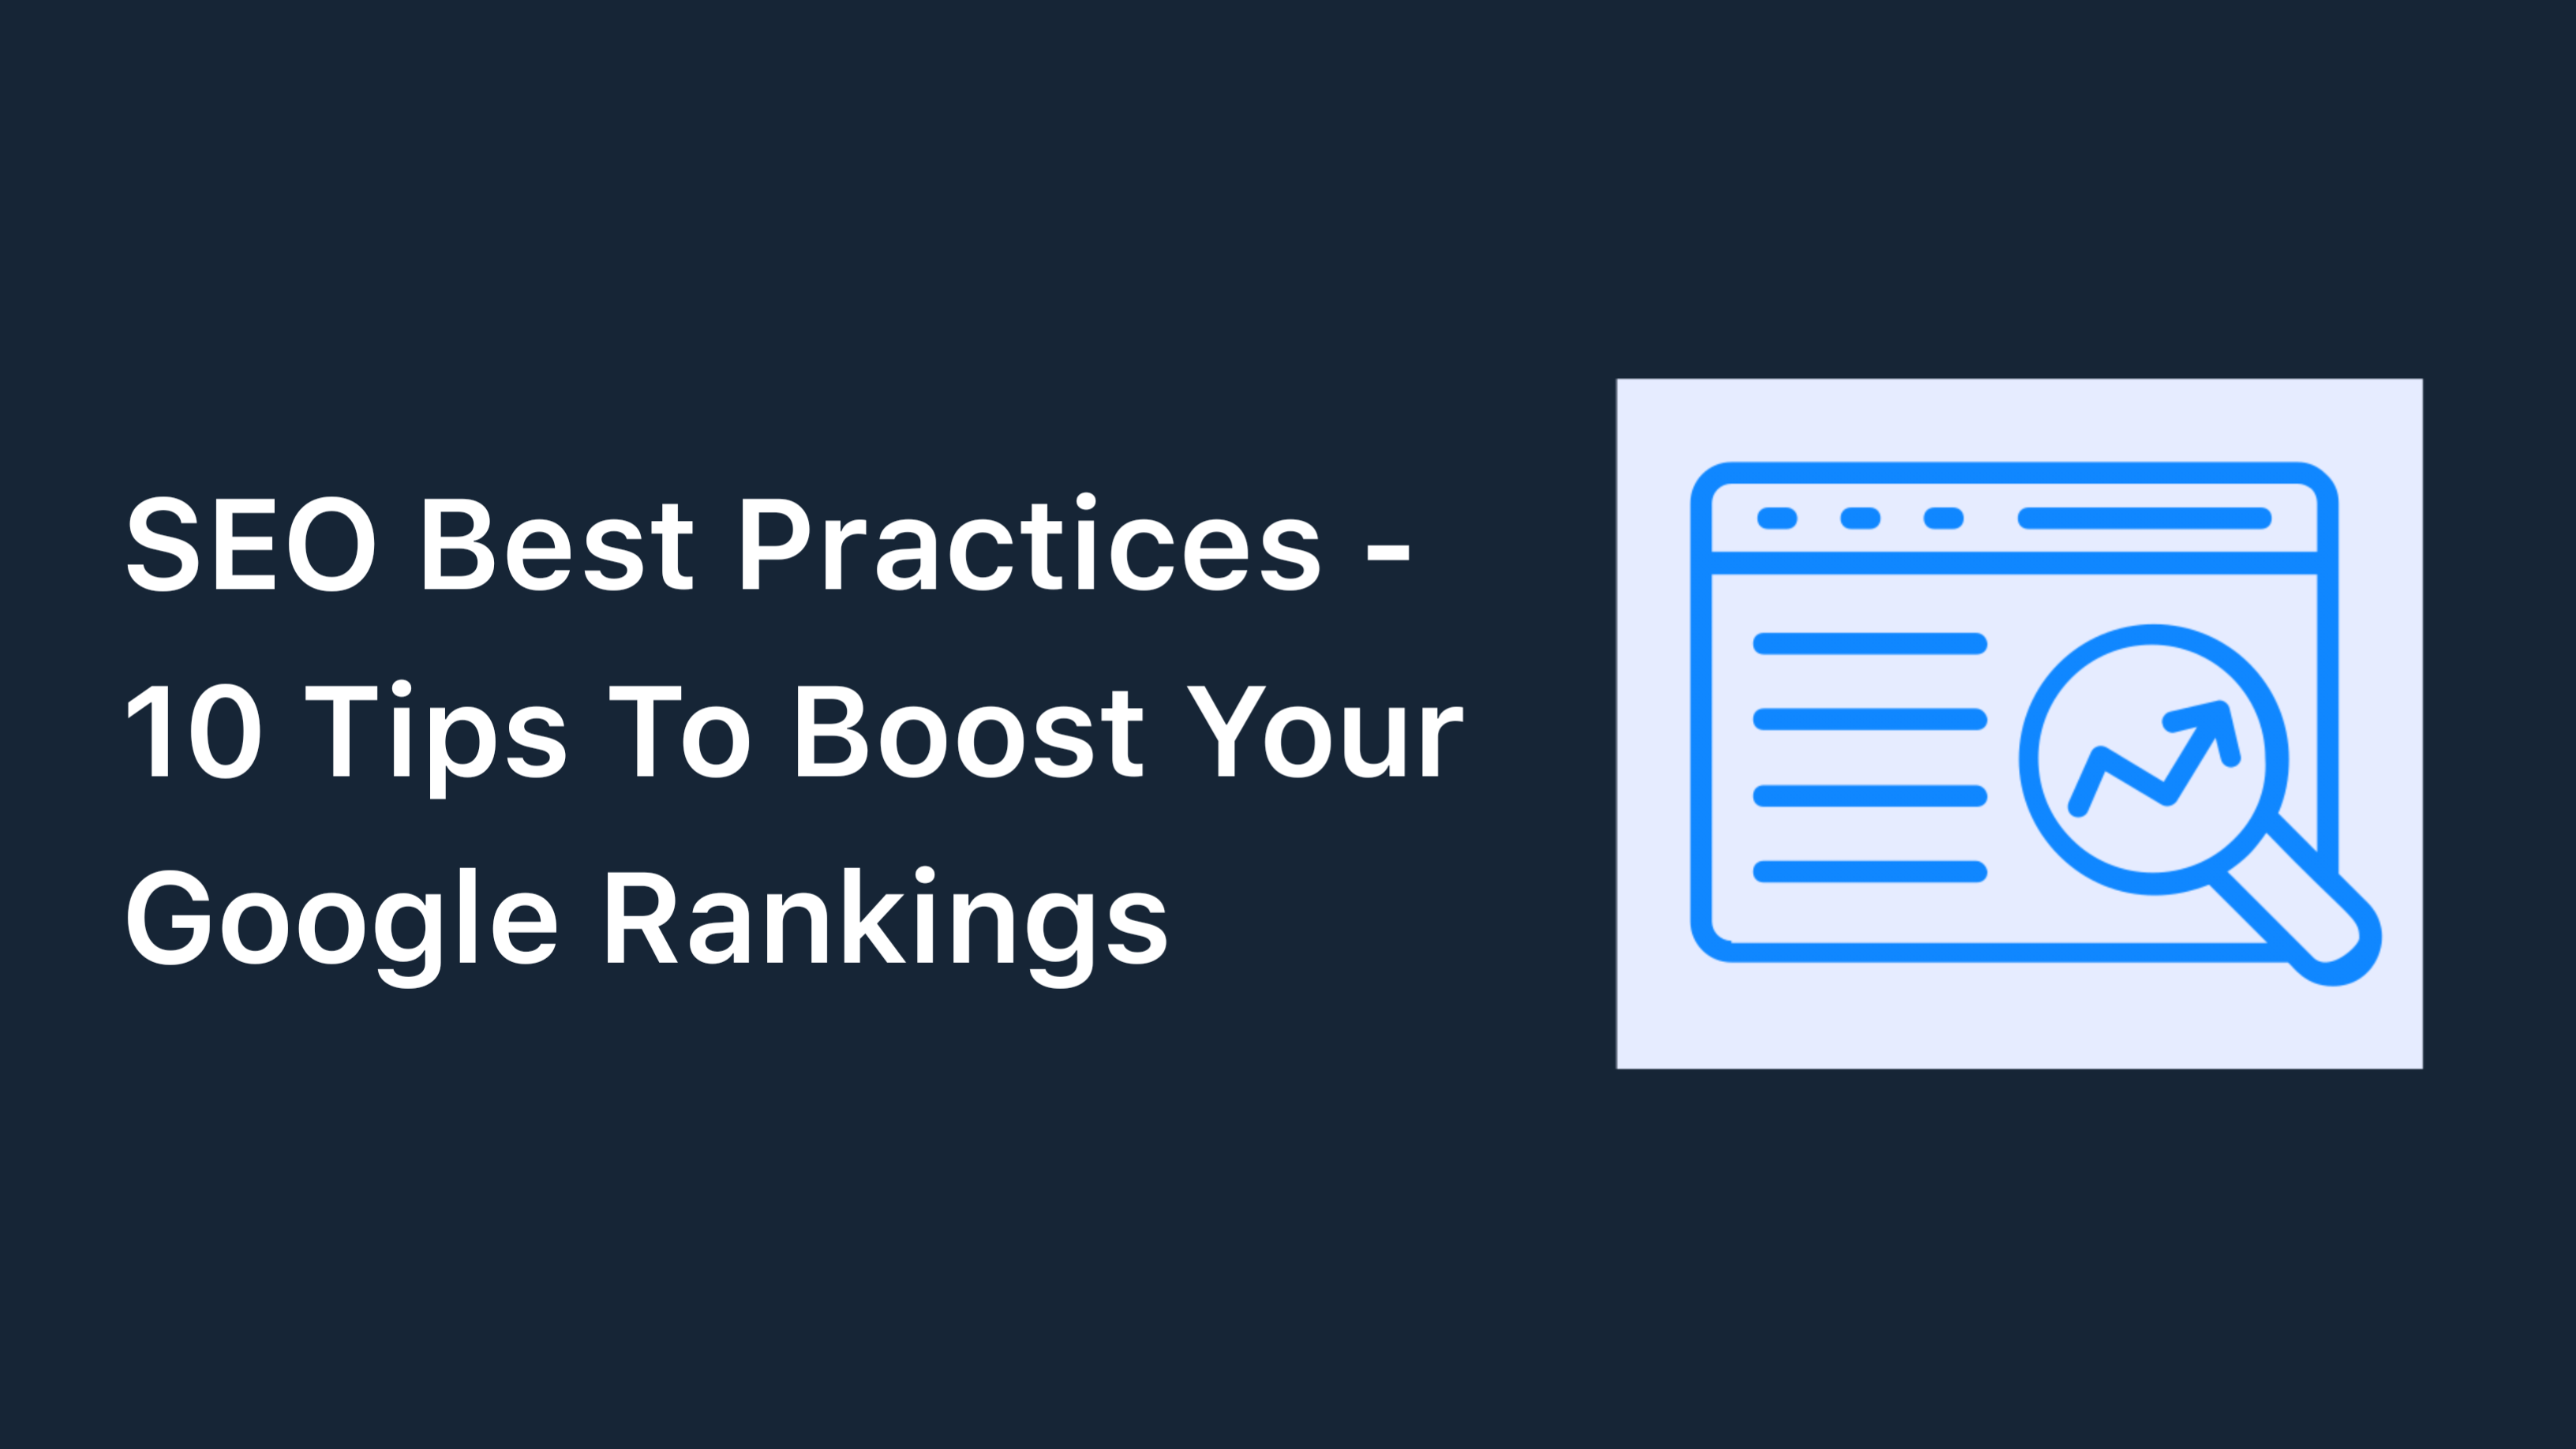 SEO Best Practices - 10 Tips To Boost Your Google Rankings